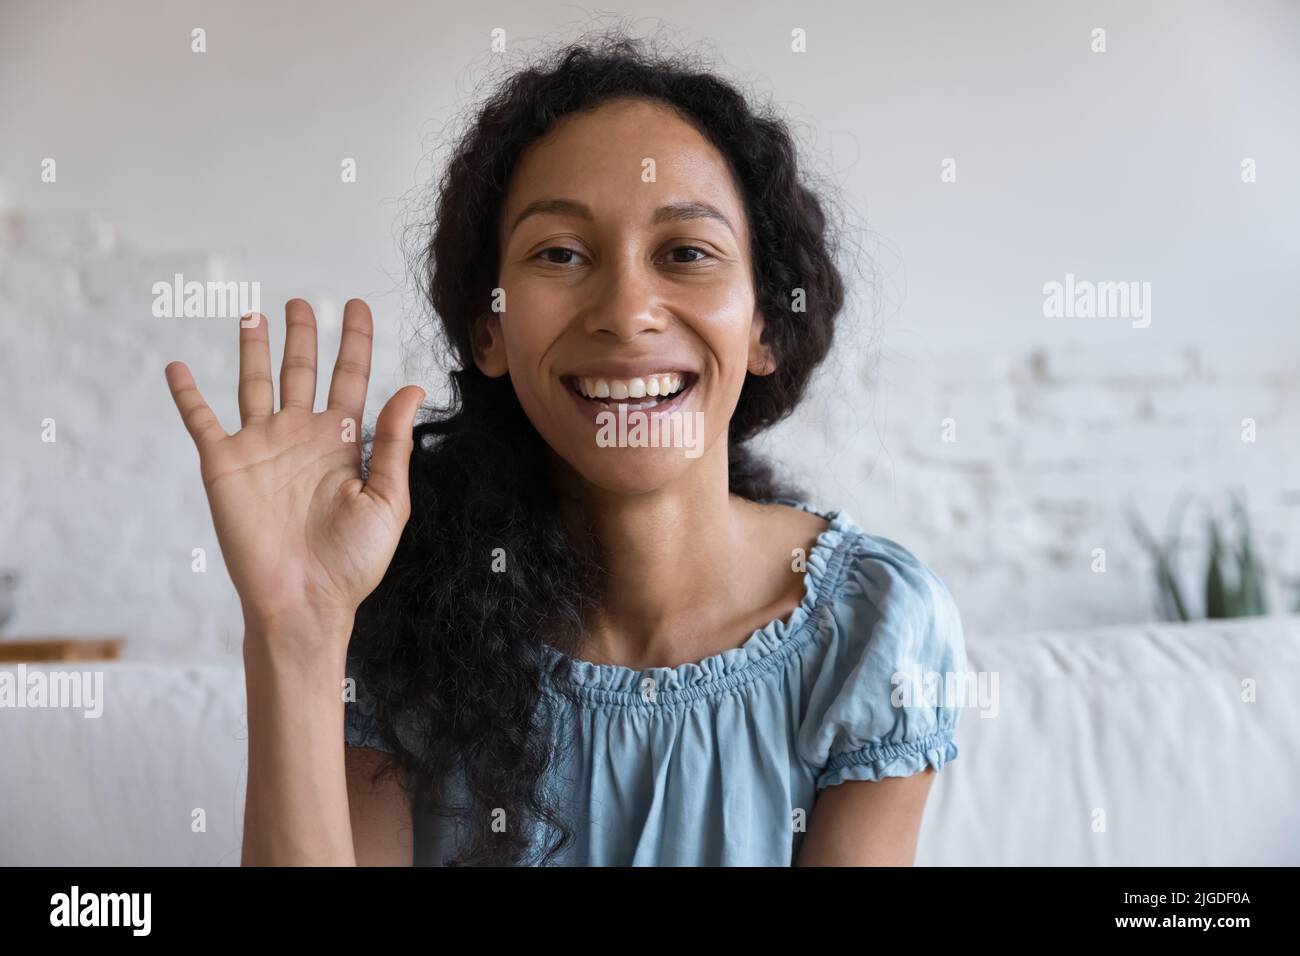 African woman smile looks at camera make video call Stock Photo